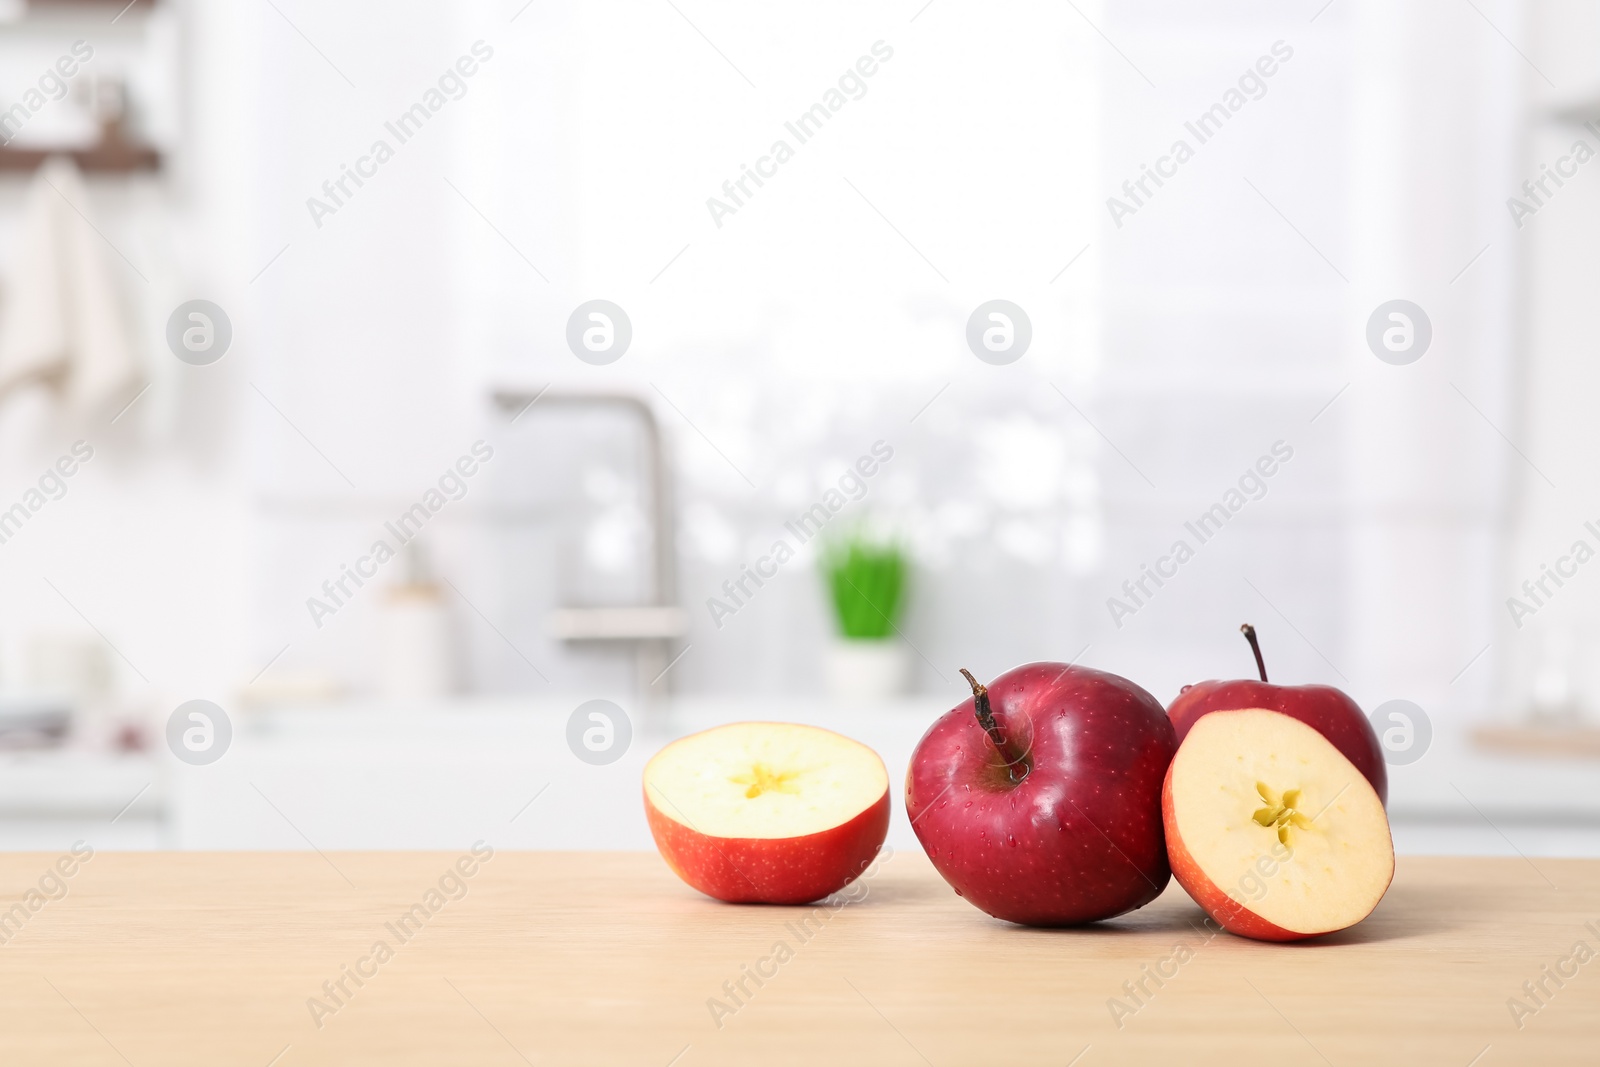 Photo of Whole and cut apples on wooden counter in kitchen, space for text